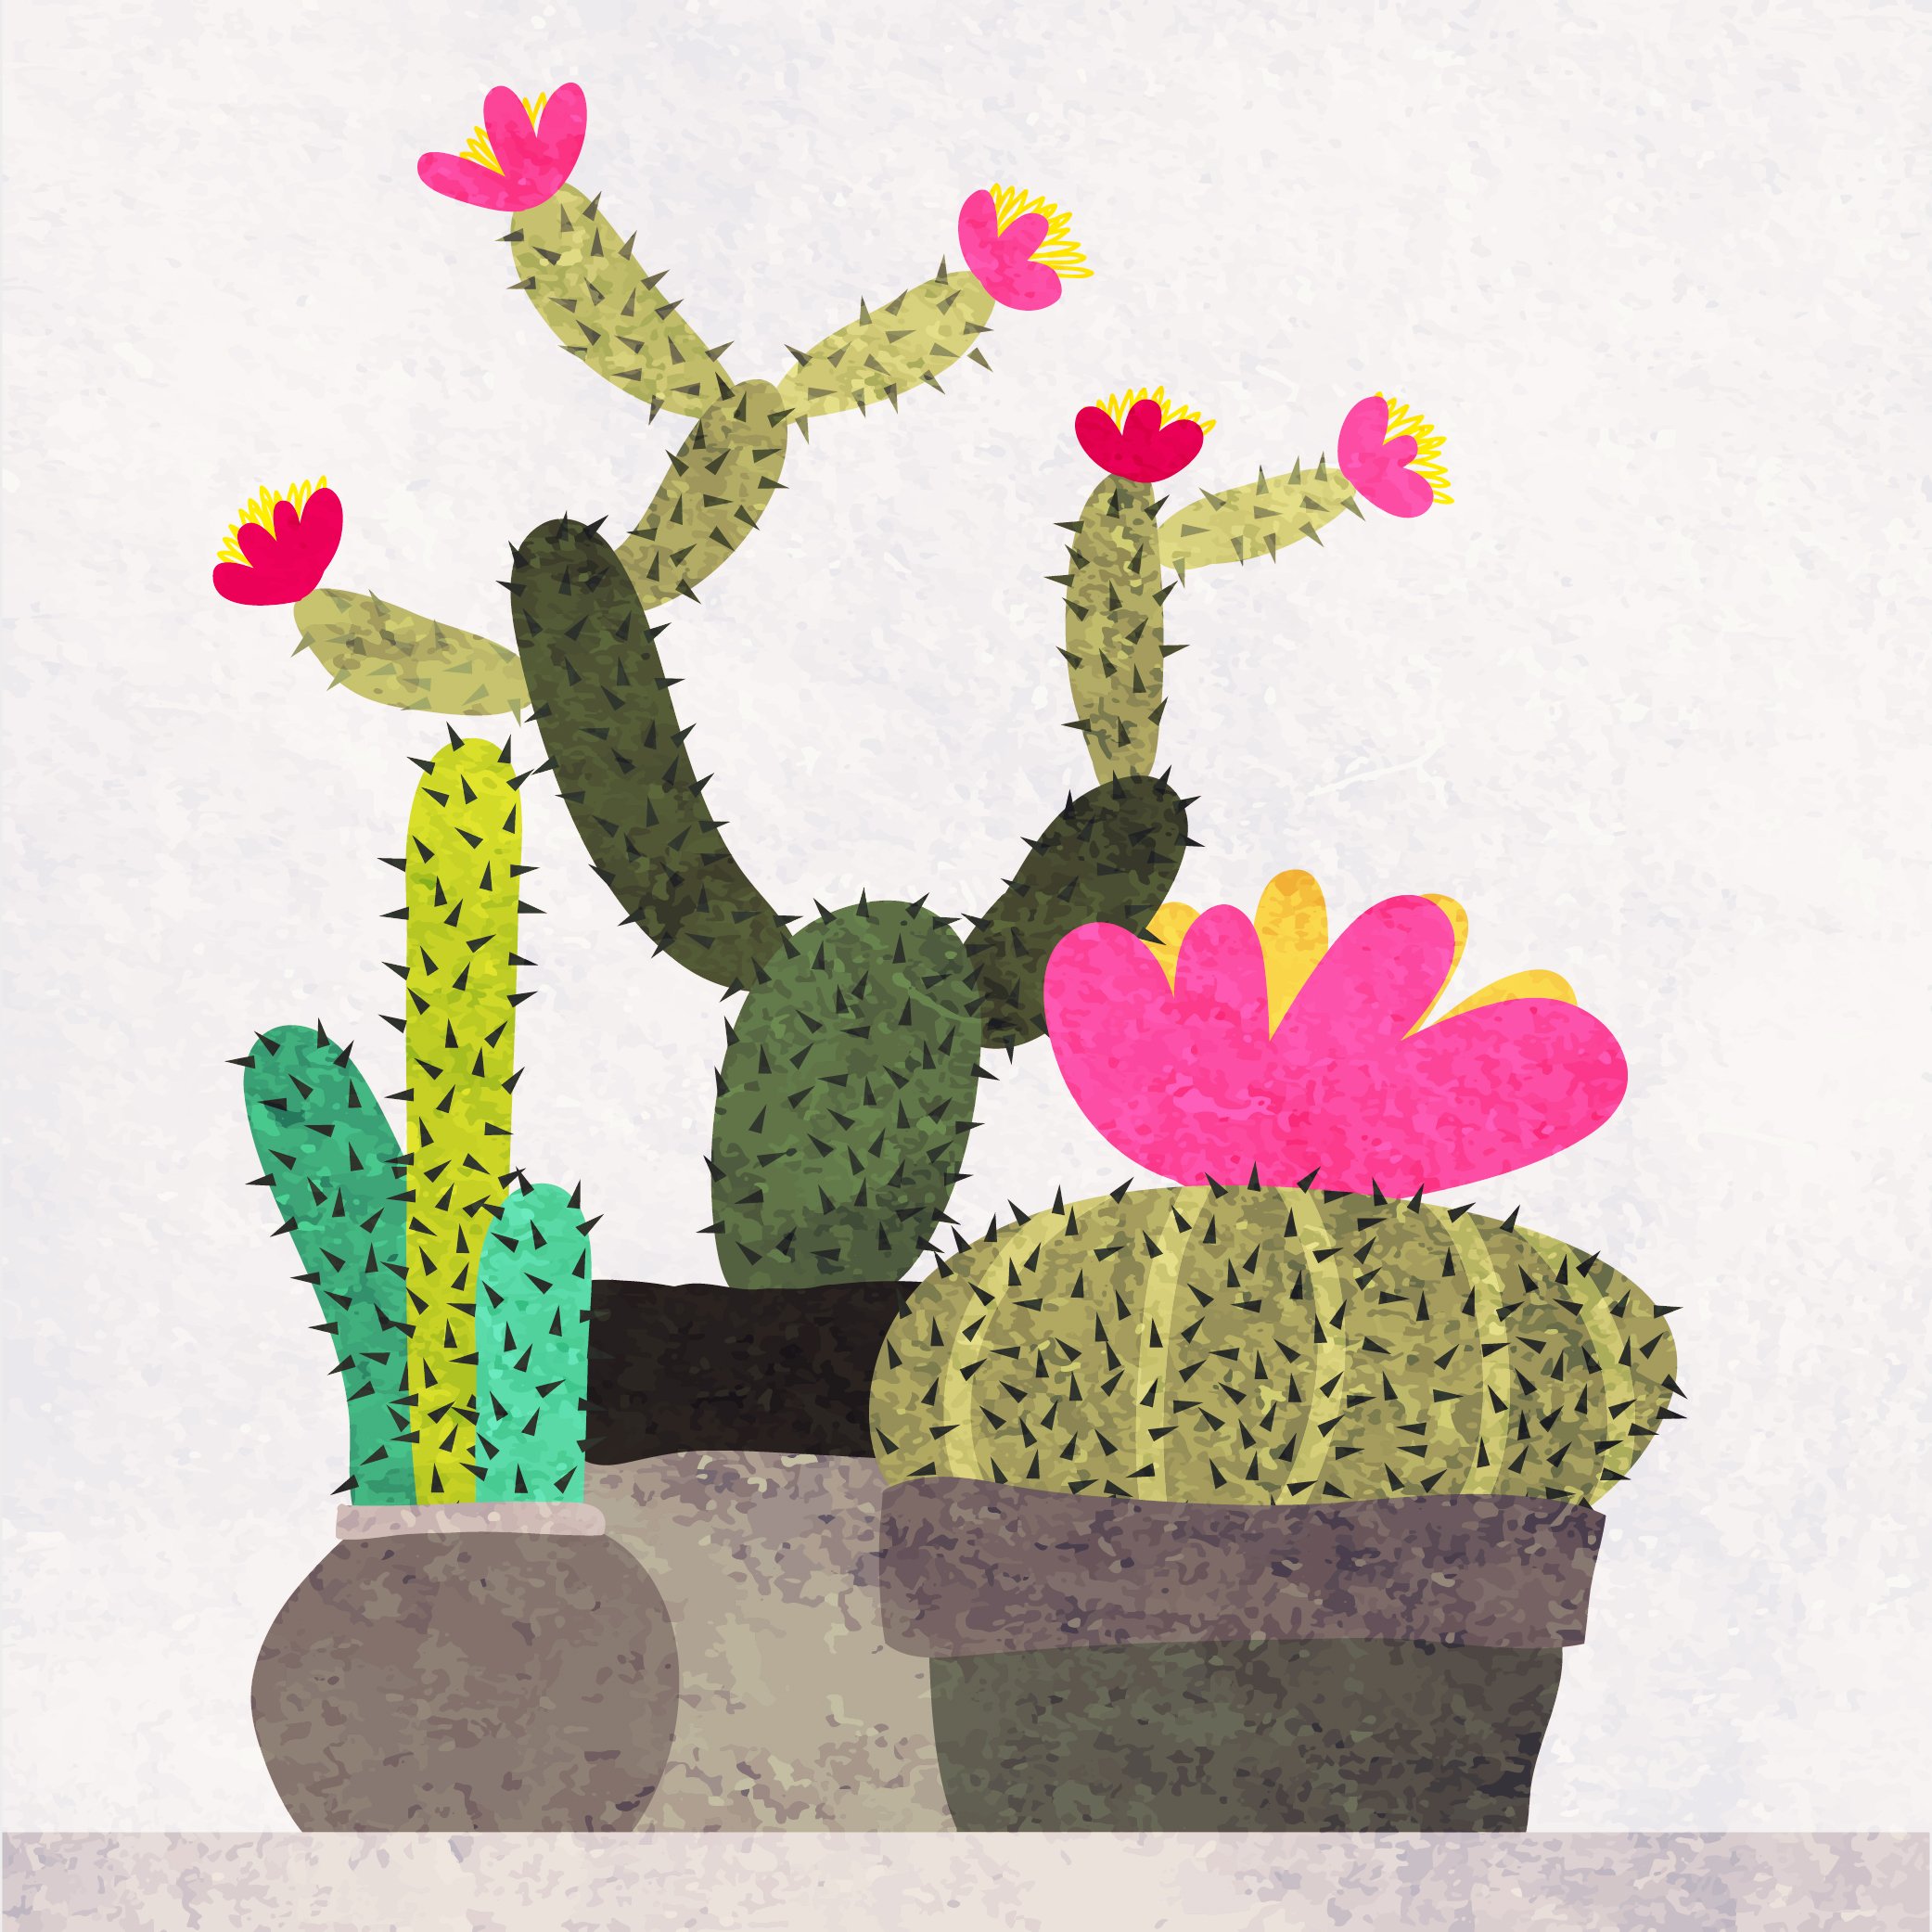 Painting of a potted cactus with pink flowers.